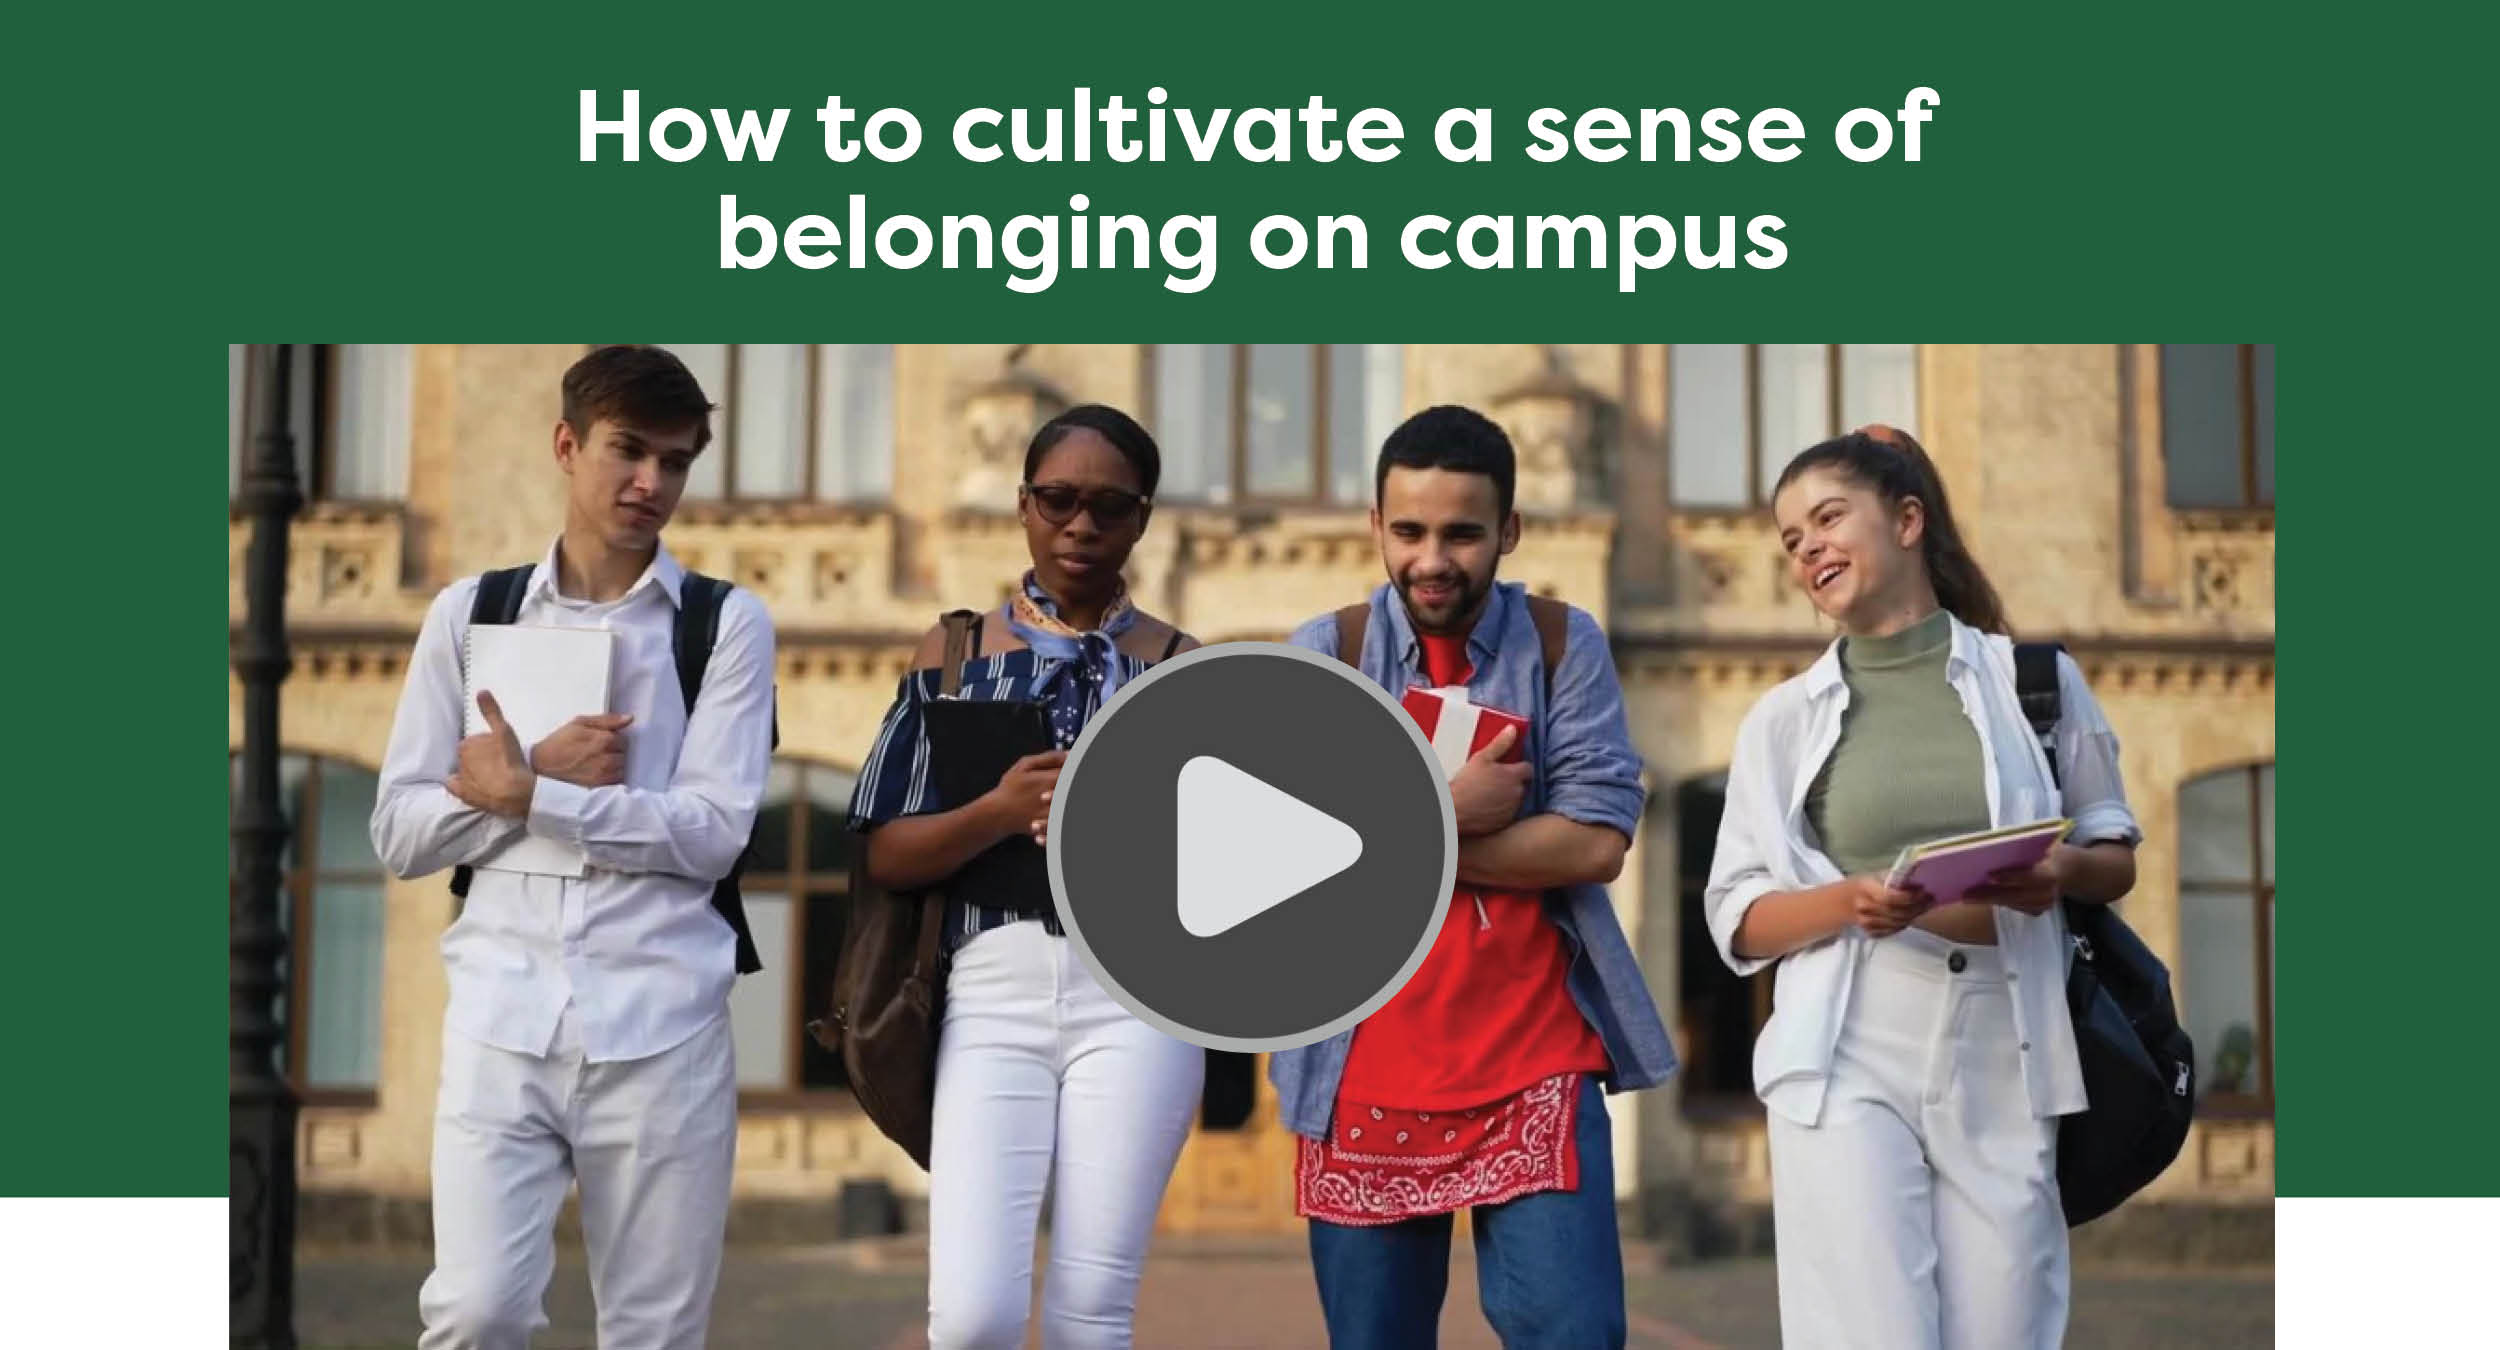 How to cultivate a sense of belonging on campus